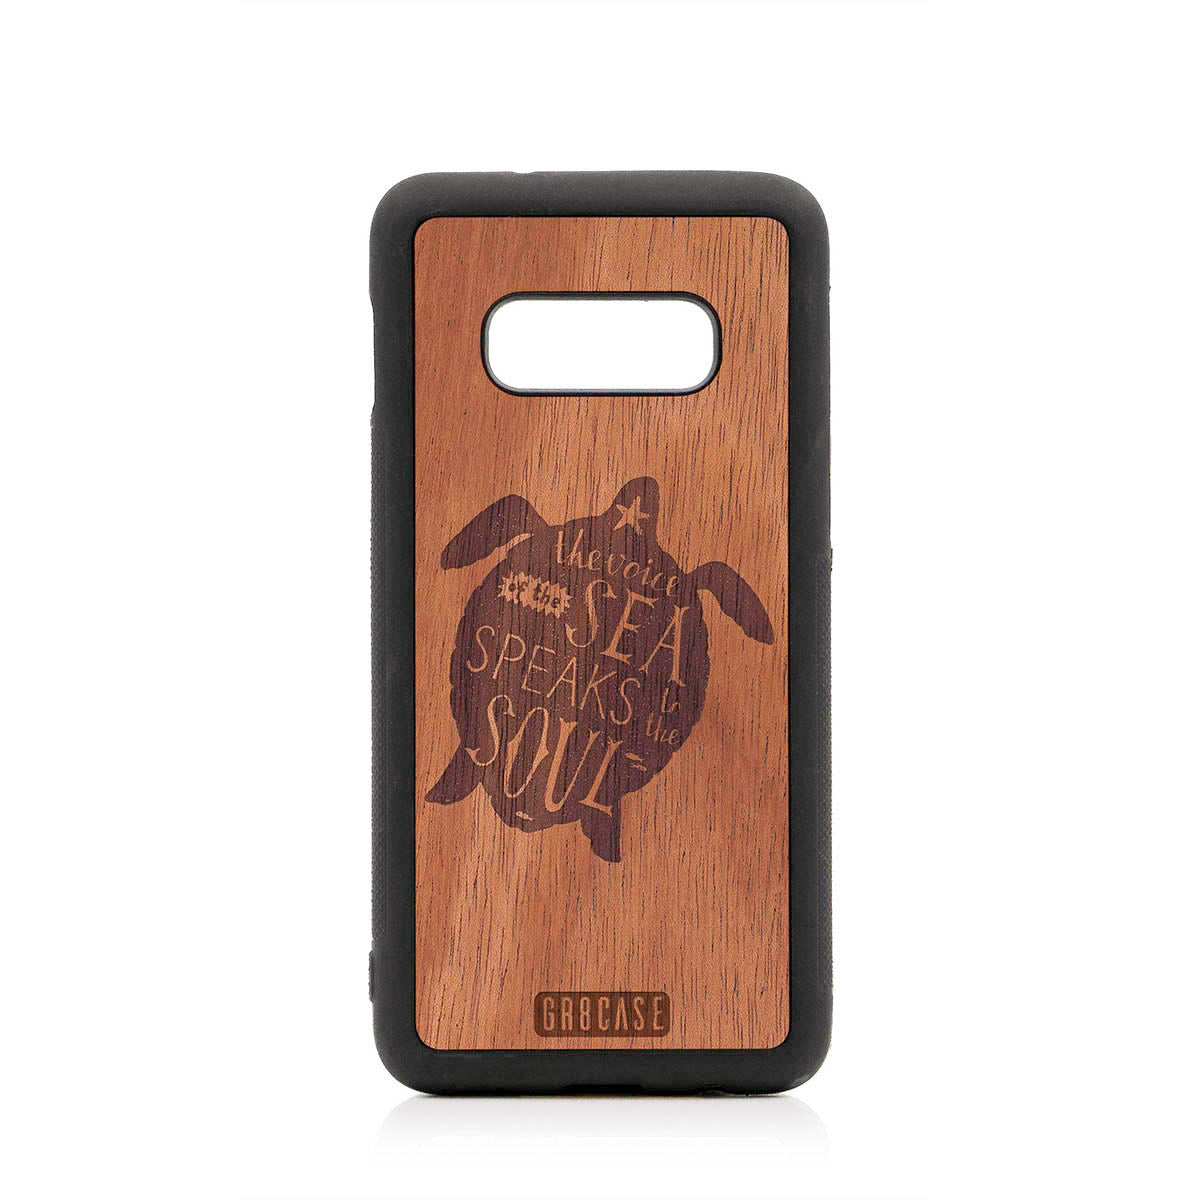 The Voice Of The Sea Speaks To The Soul (Turtle) Design Wood Case For Samsung Galaxy S10E